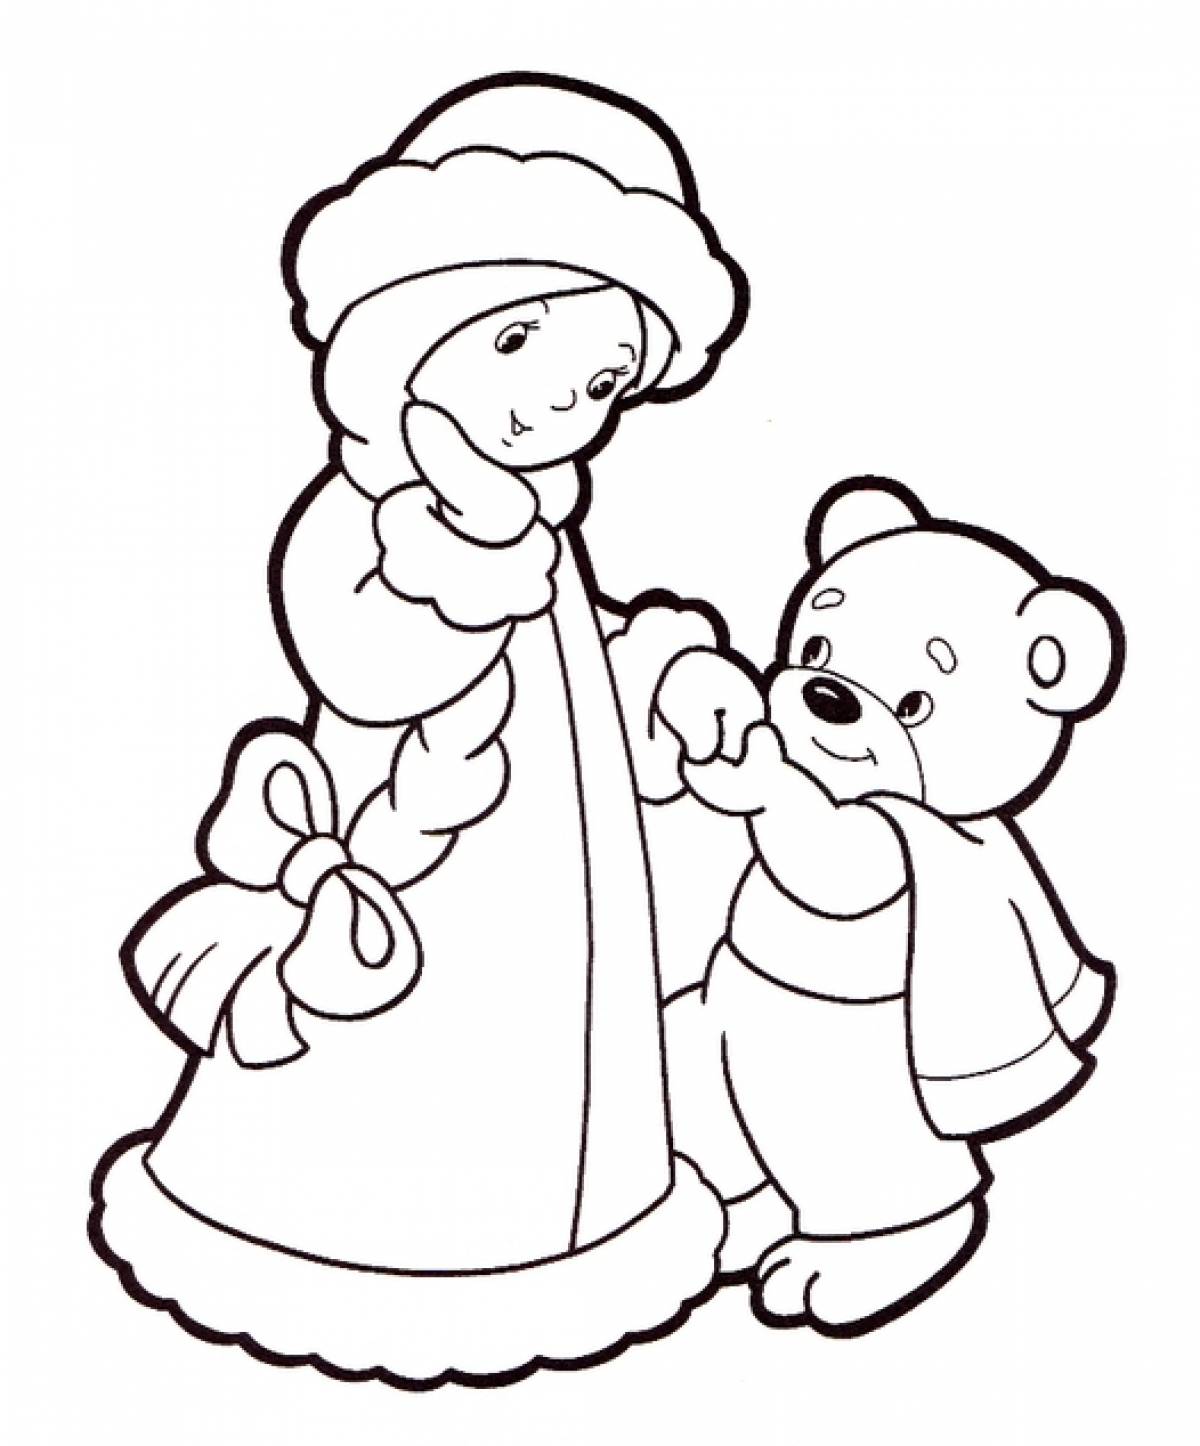 Snow Maiden and bear